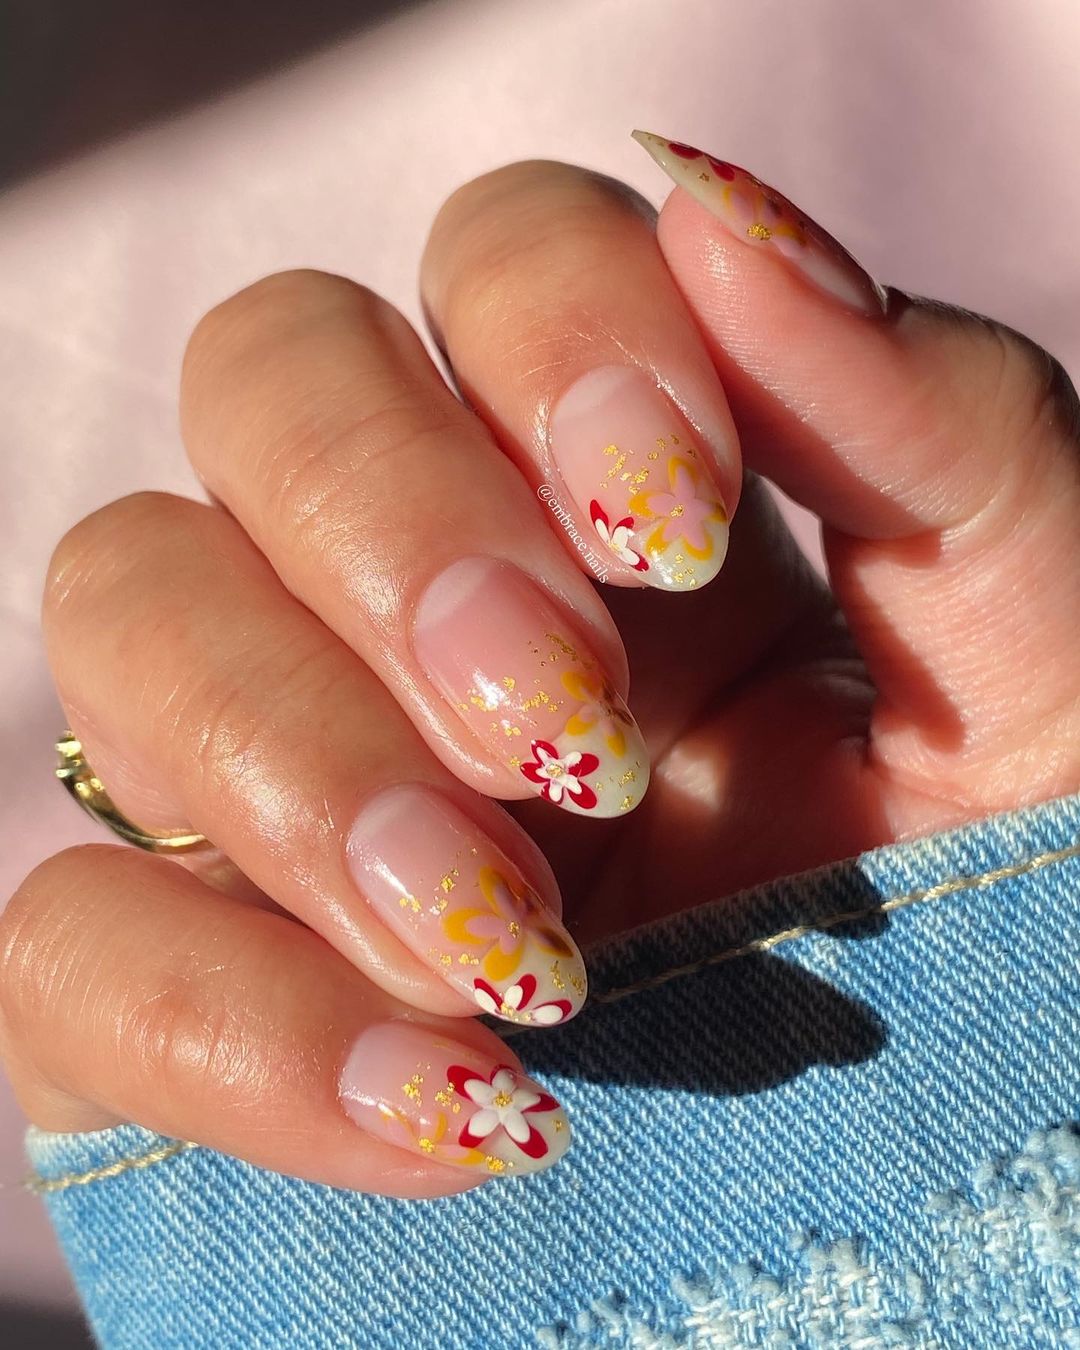 Seventies-Inspired Almond Manicure